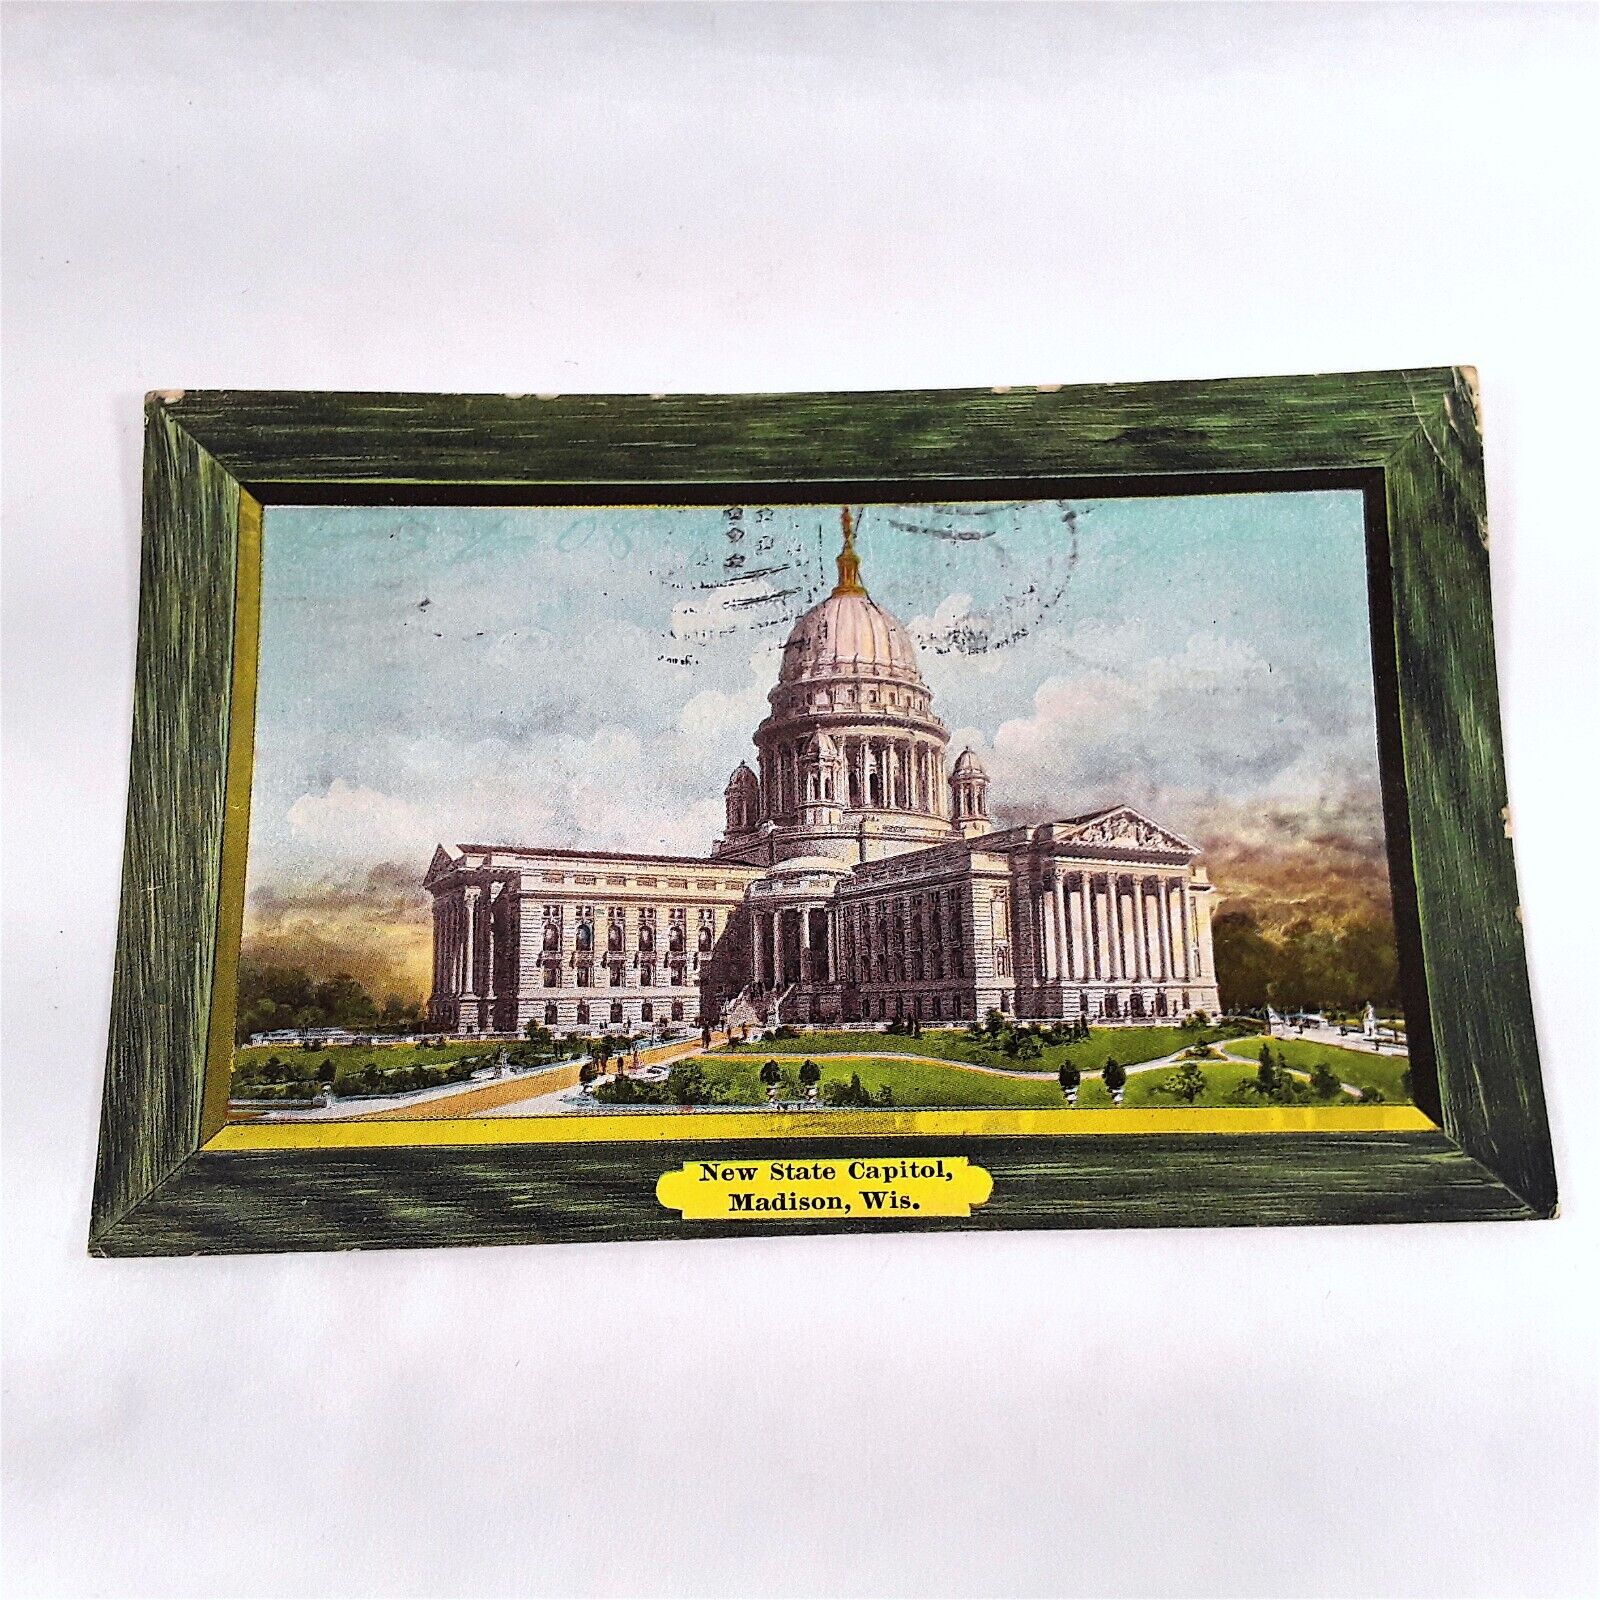 Madison Wisconsin -New State Capitol Building- Frame Border Postcard Posted 1908